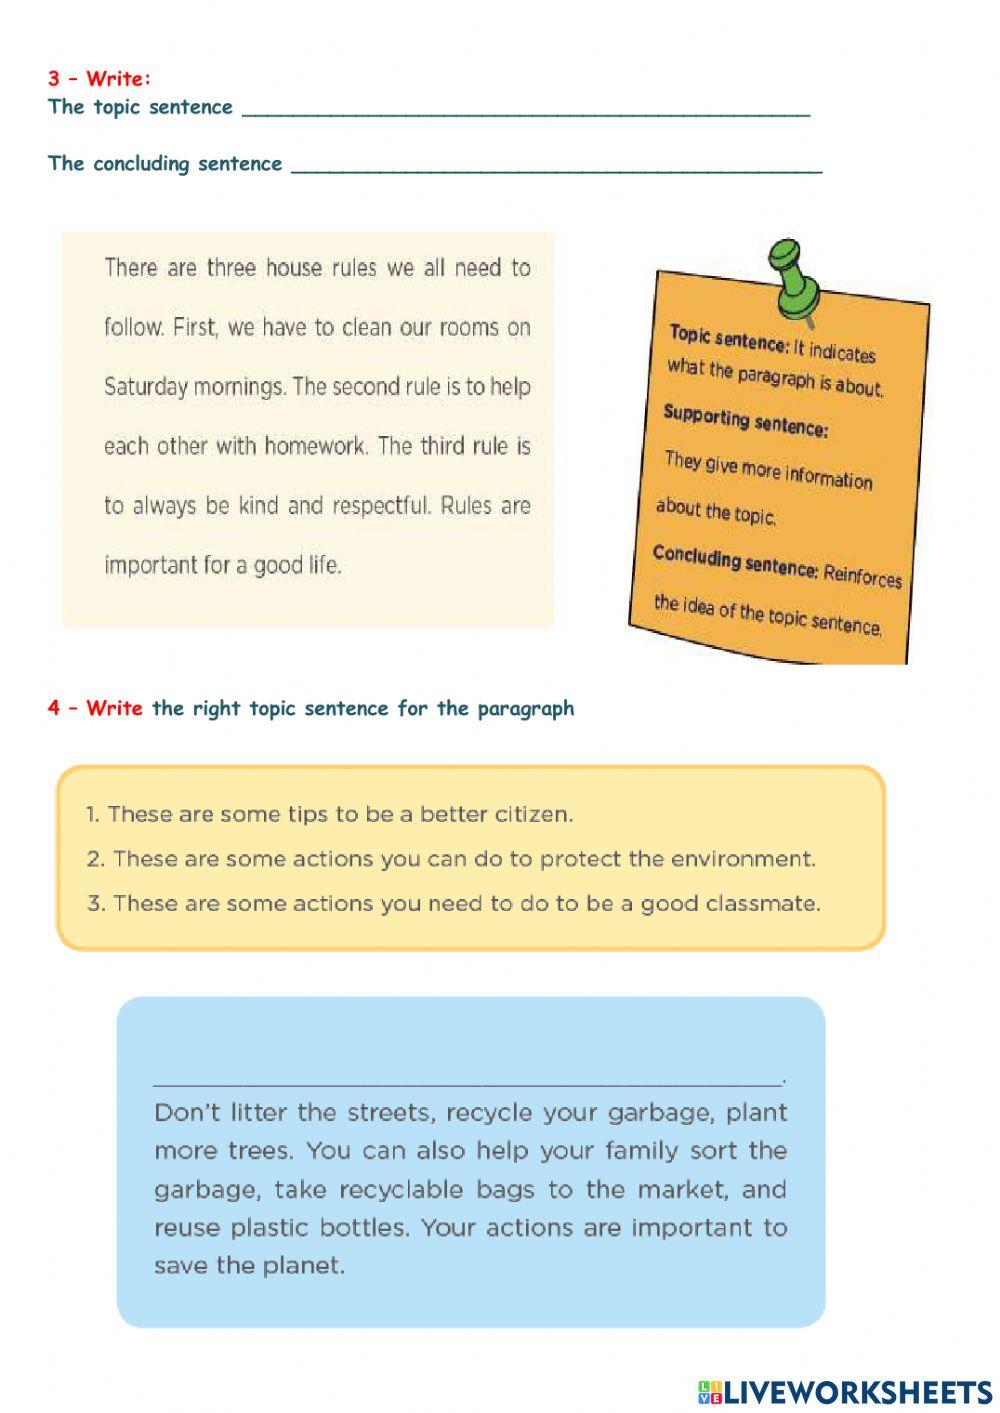 Do-s and Don’ts! & A Good Classmate is a Good Citizen!